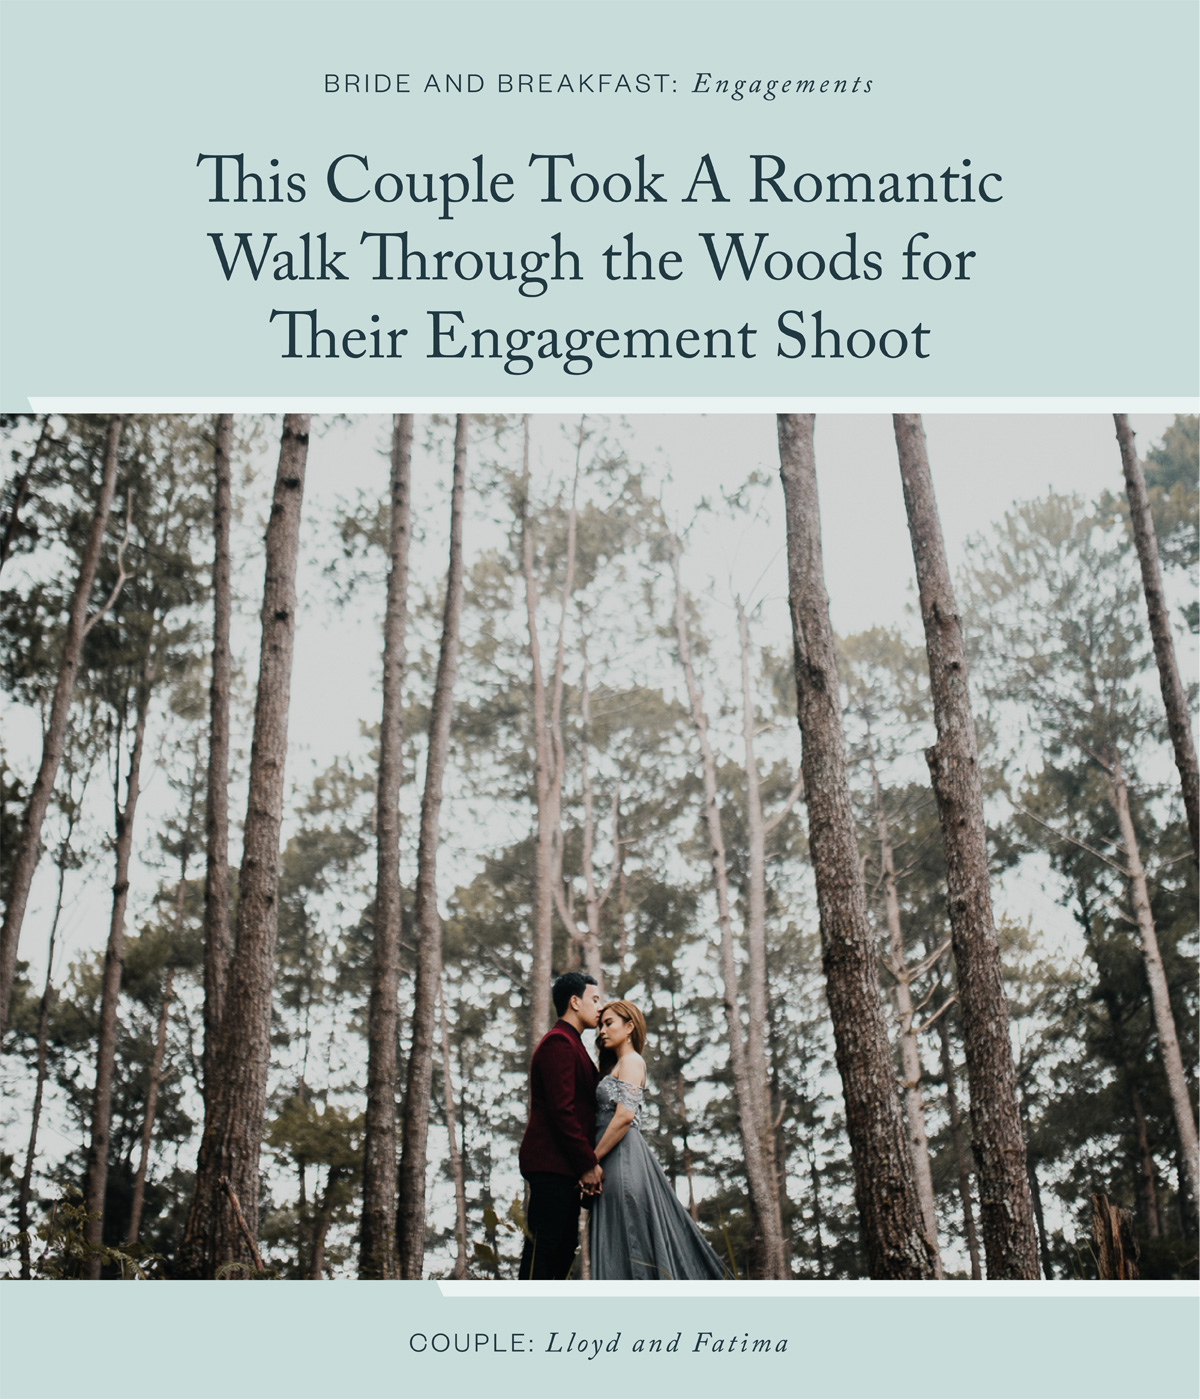 This Couple Took A Romantic Walk Through the Woods for Their Engagement Shoot